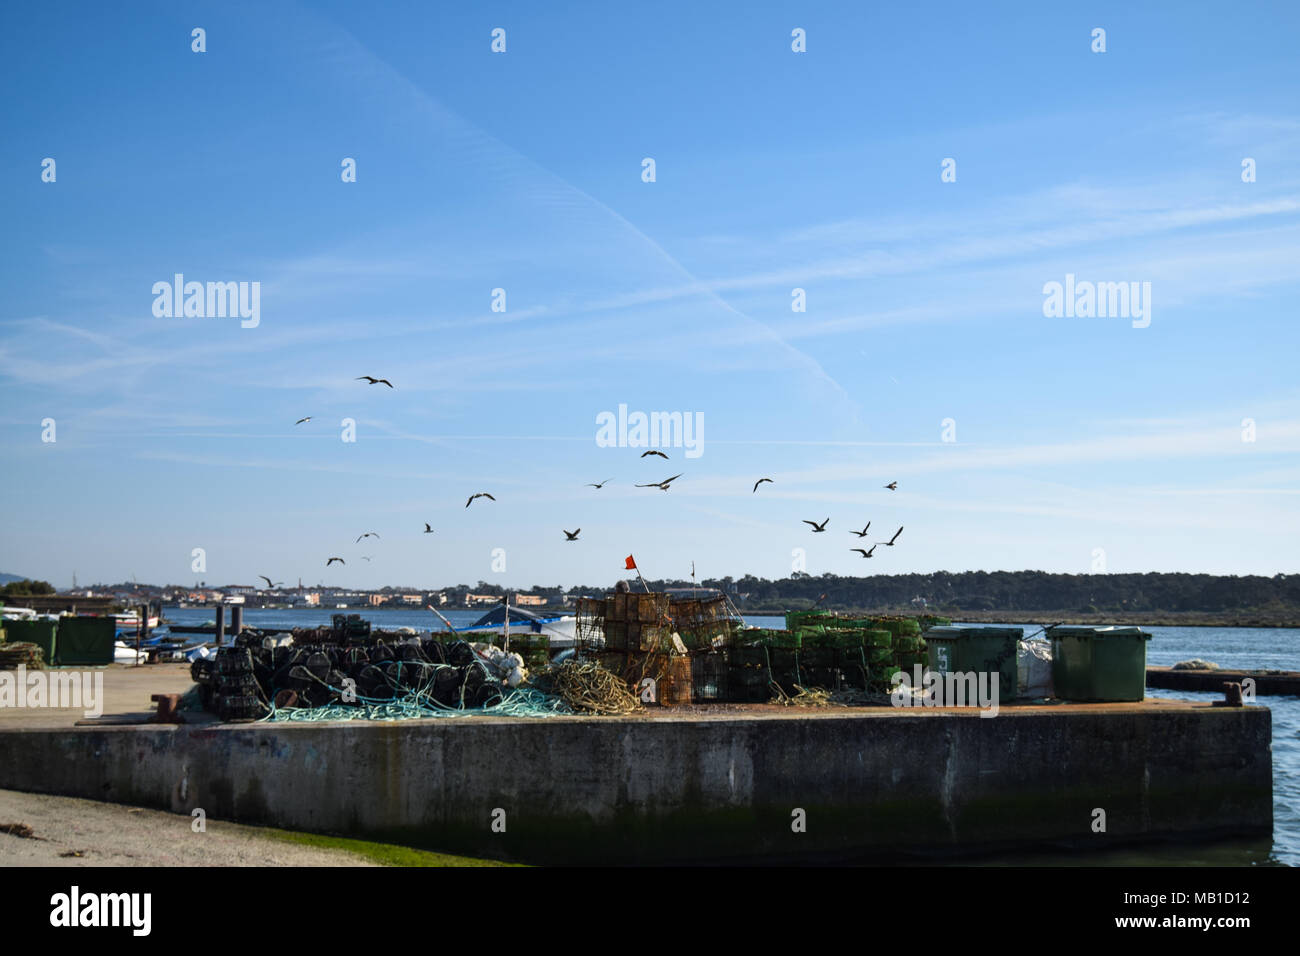 Seagulls flying over fishing activities port with cages for crab catching in Esposende north of Portugal Stock Photo